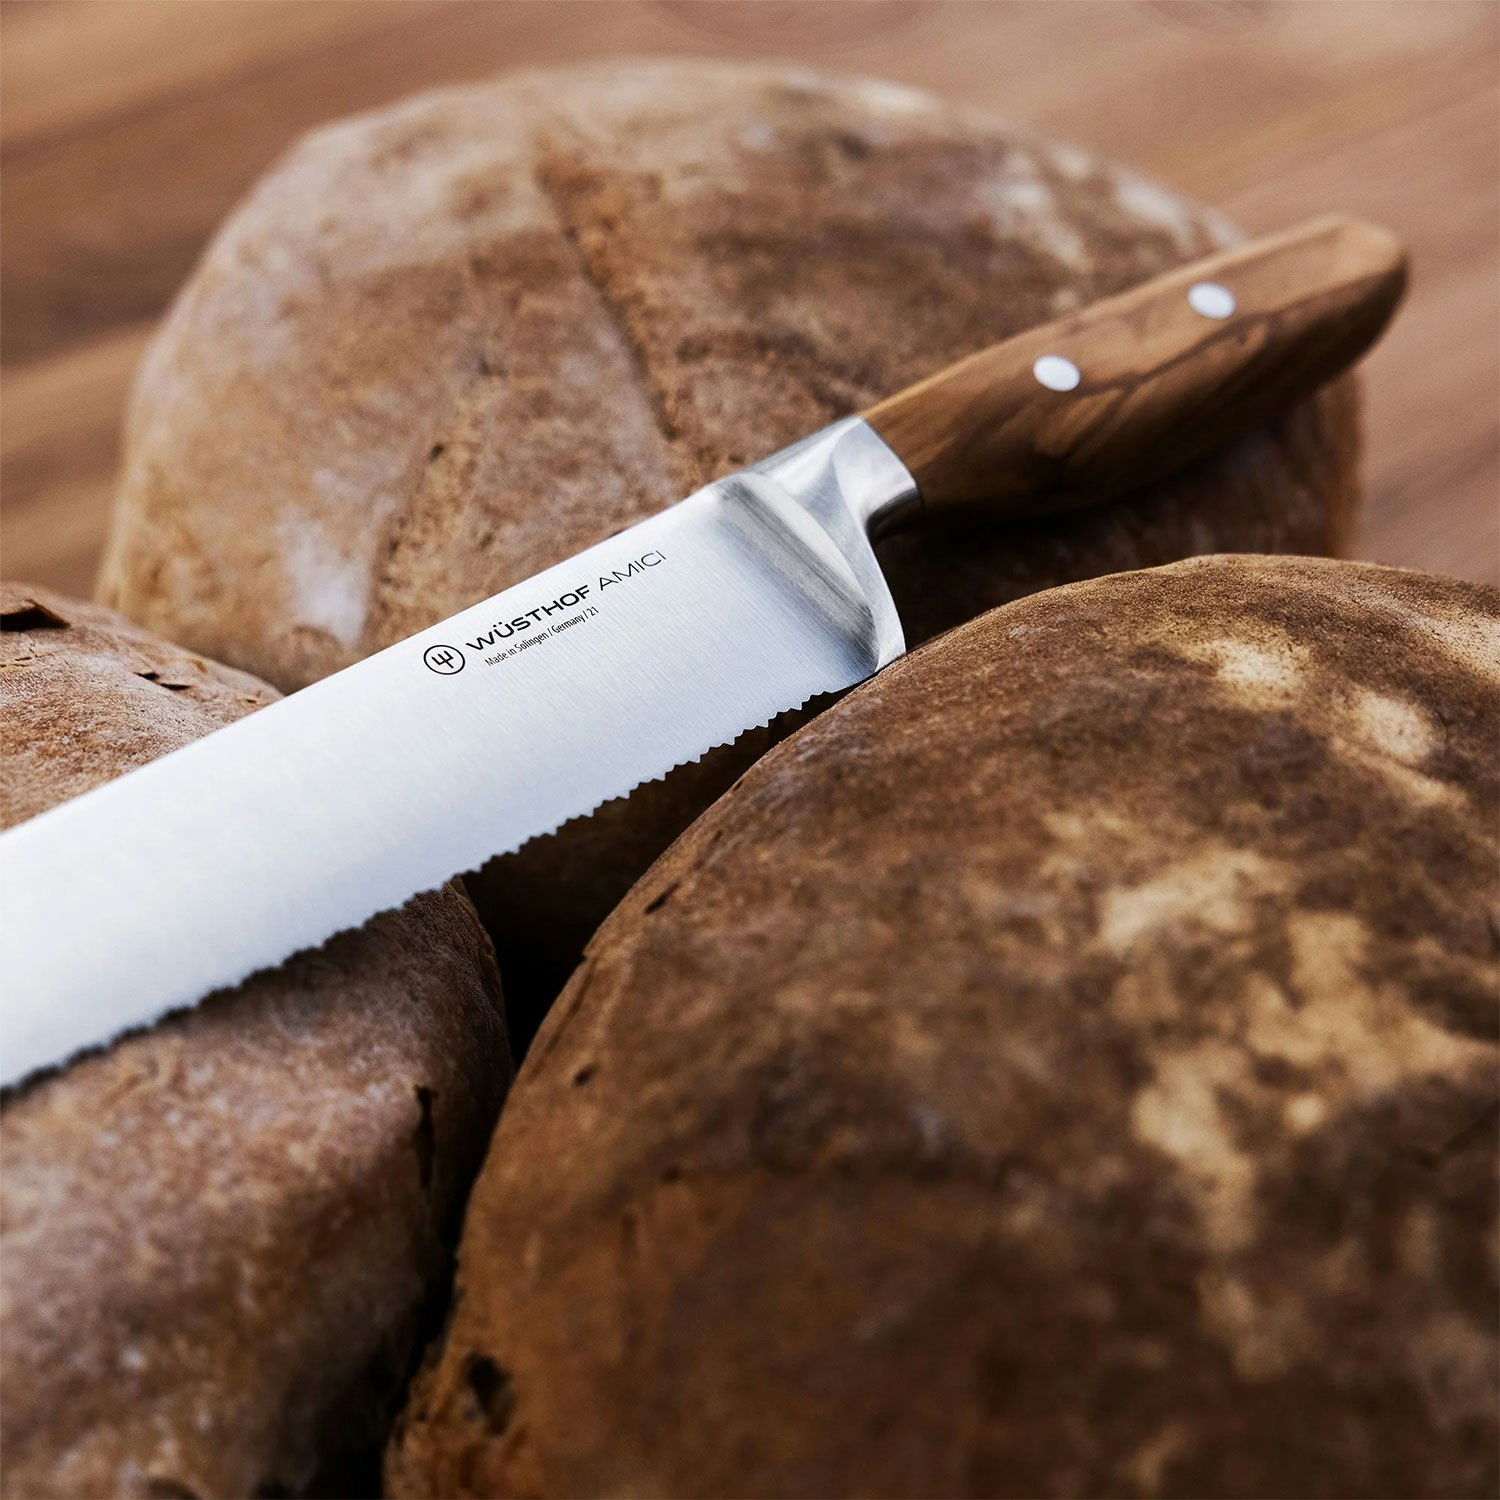 https://royaldesign.com/image/2/wusthof-amici-bread-knife-double-toothed-23-cm-olive-wood-1